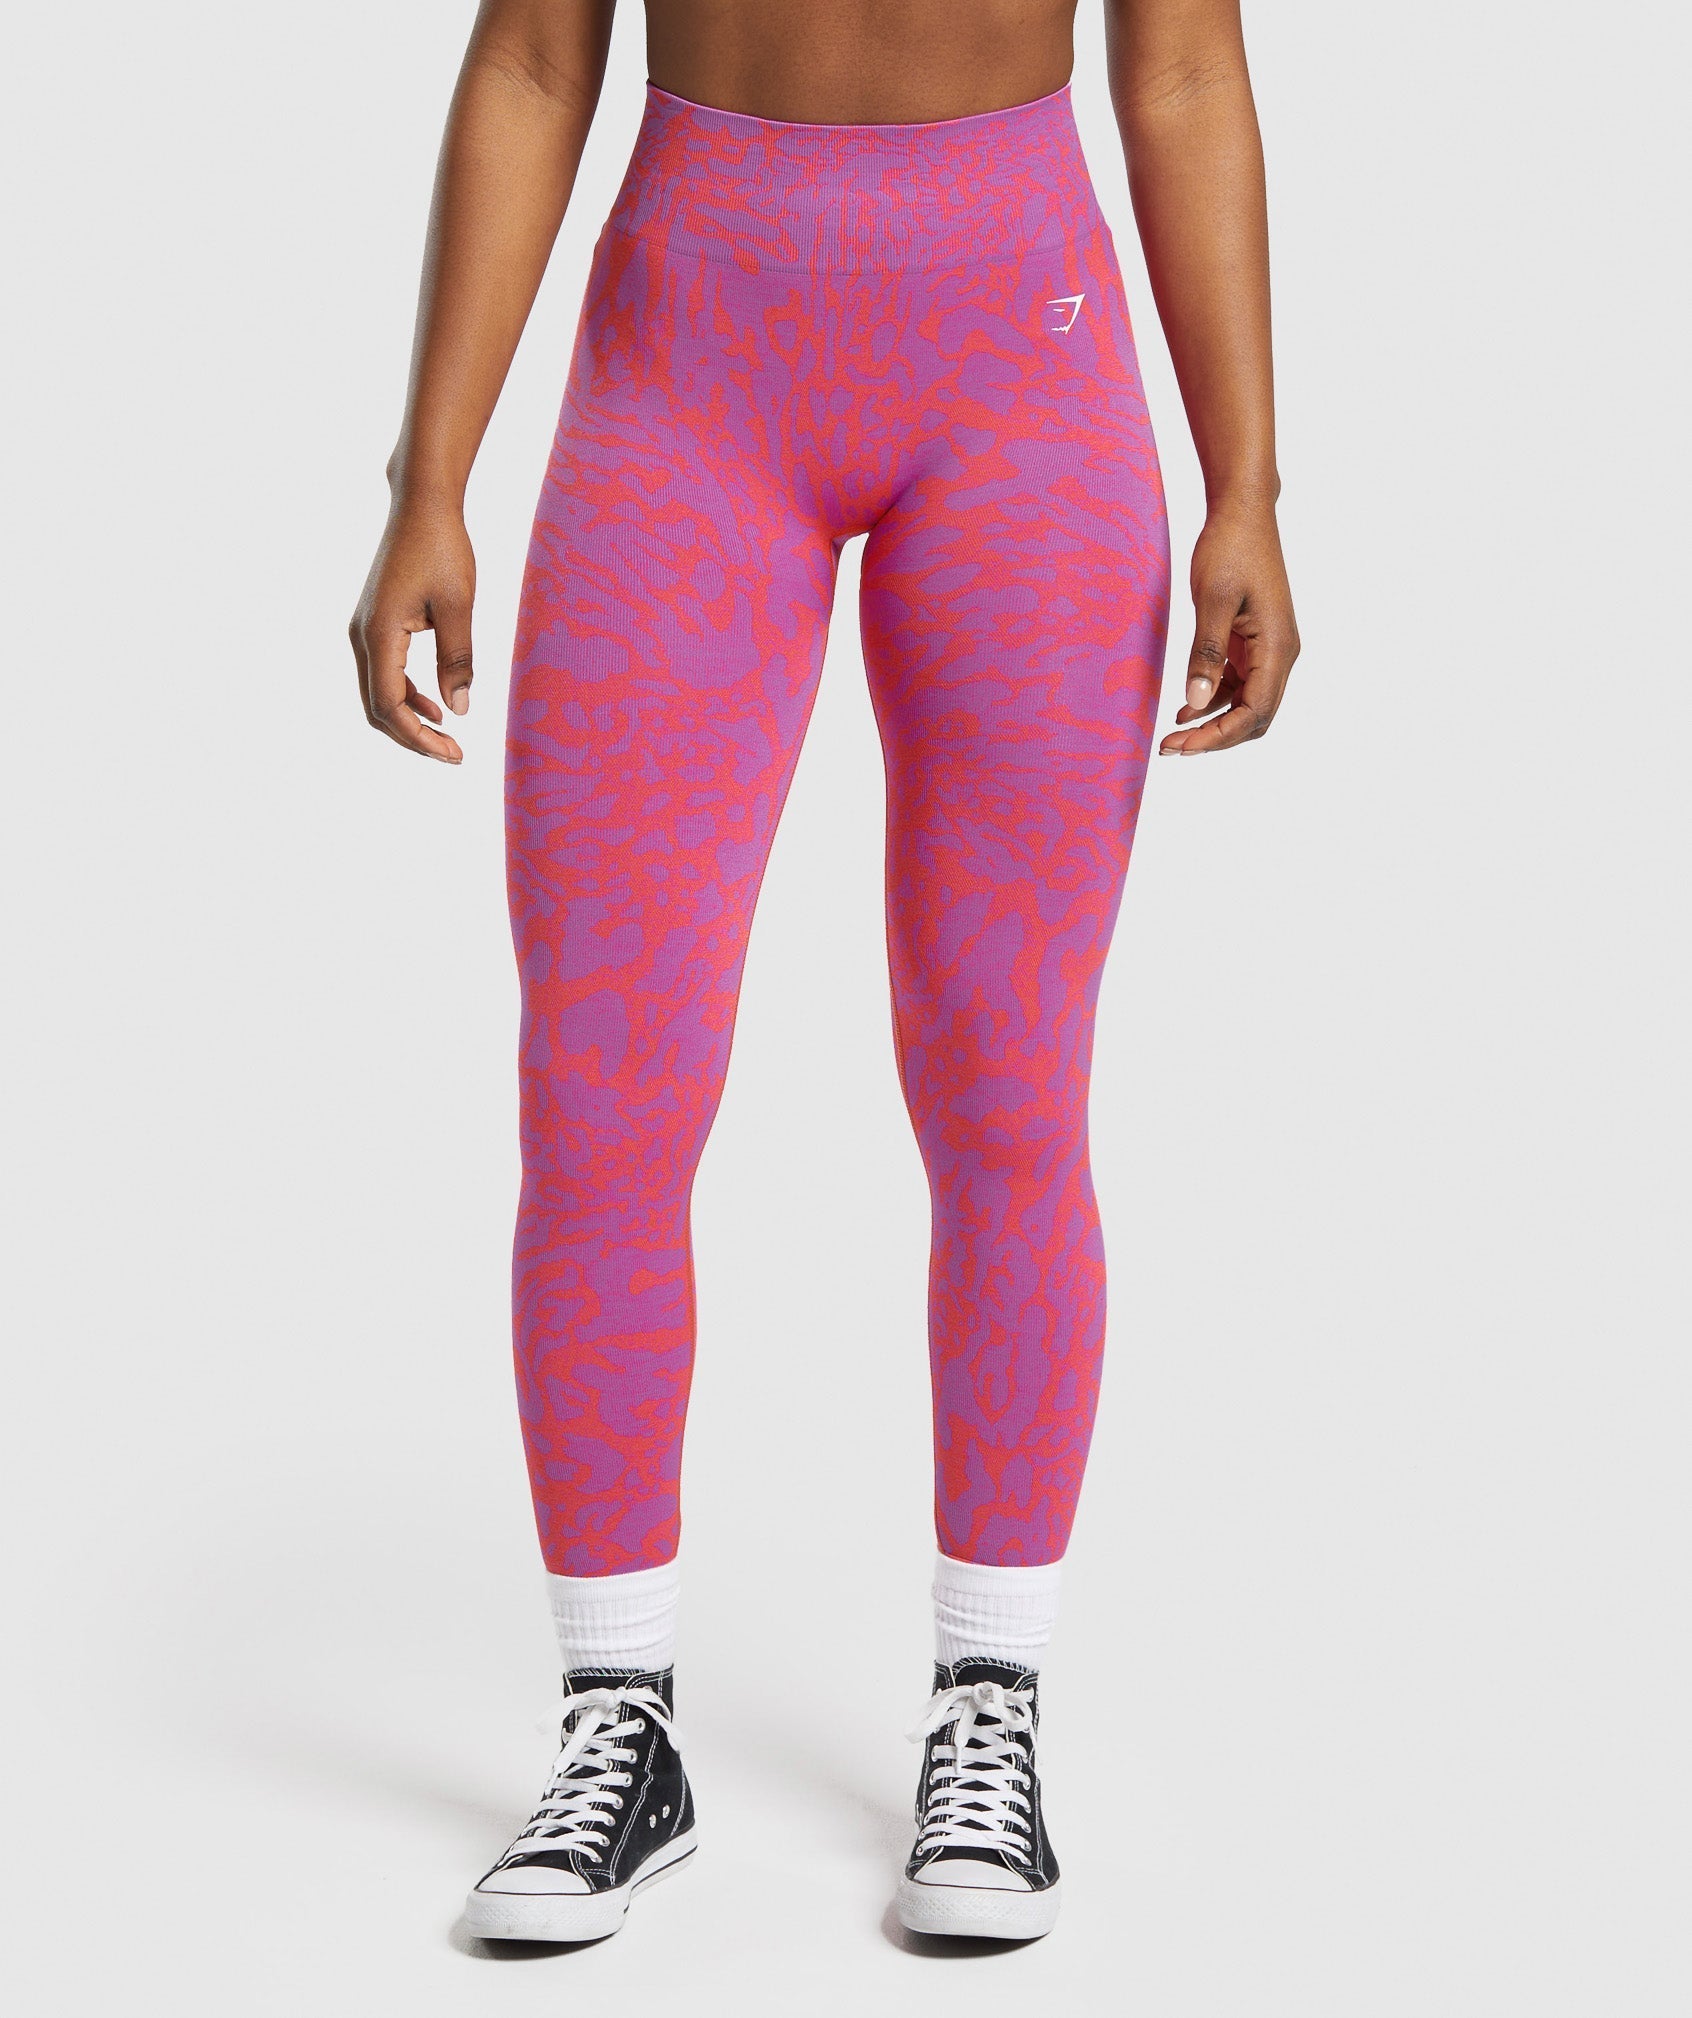 Adapt Safari Seamless Leggings in Shelly Pink/Fly Coral